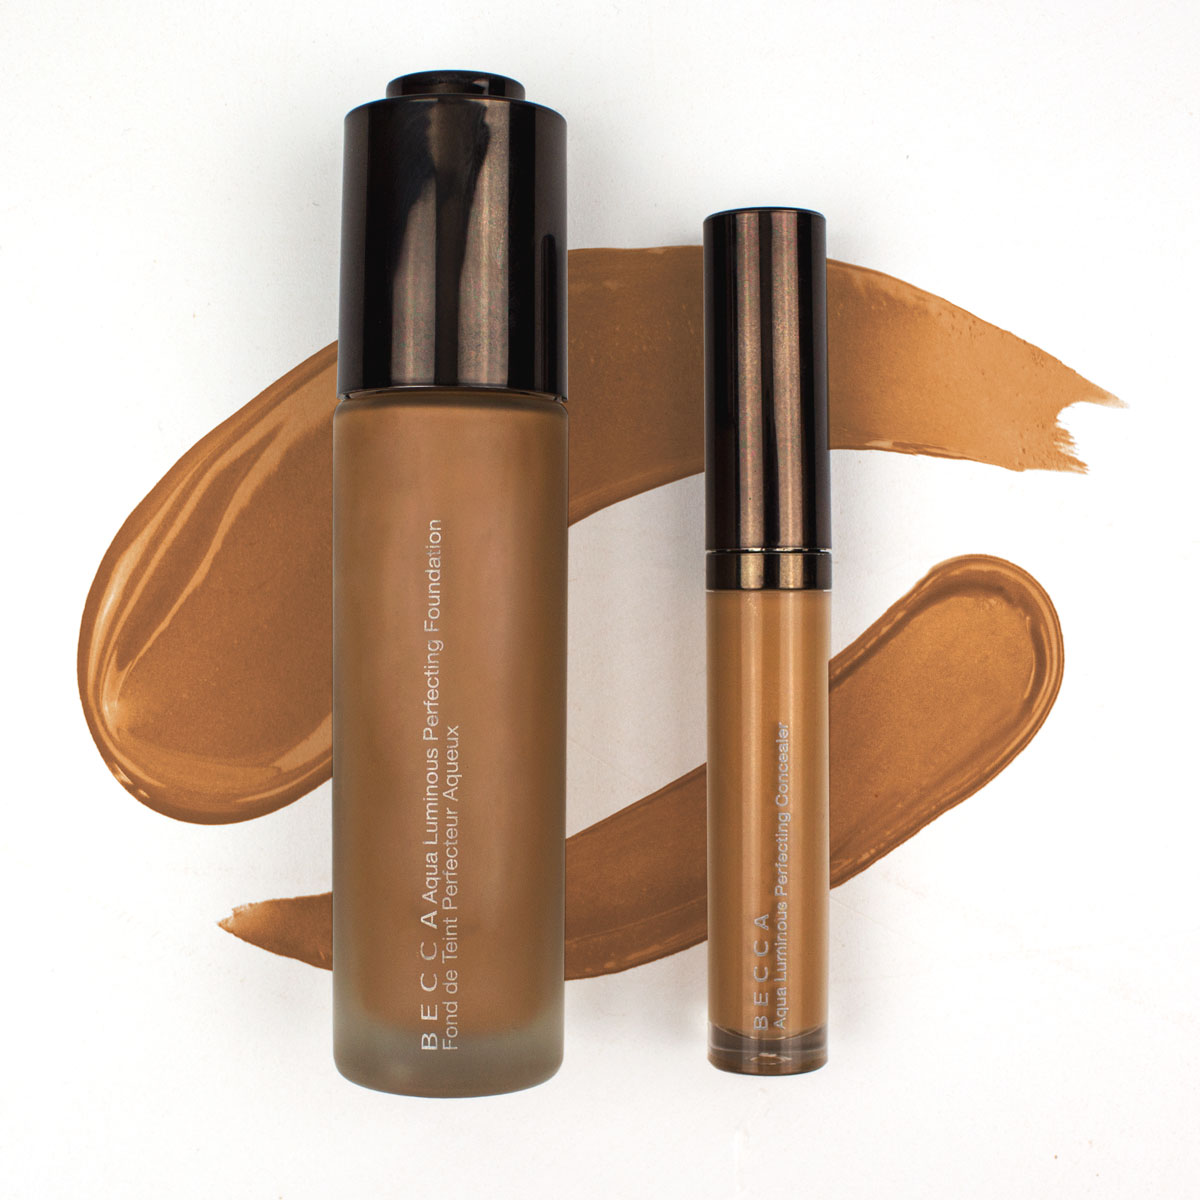 Becca Cosmetics Aqua Luminous Perfecting Foundation and Concealer: The brand considers itself expert in using the beauty of light to enhance the complexion 